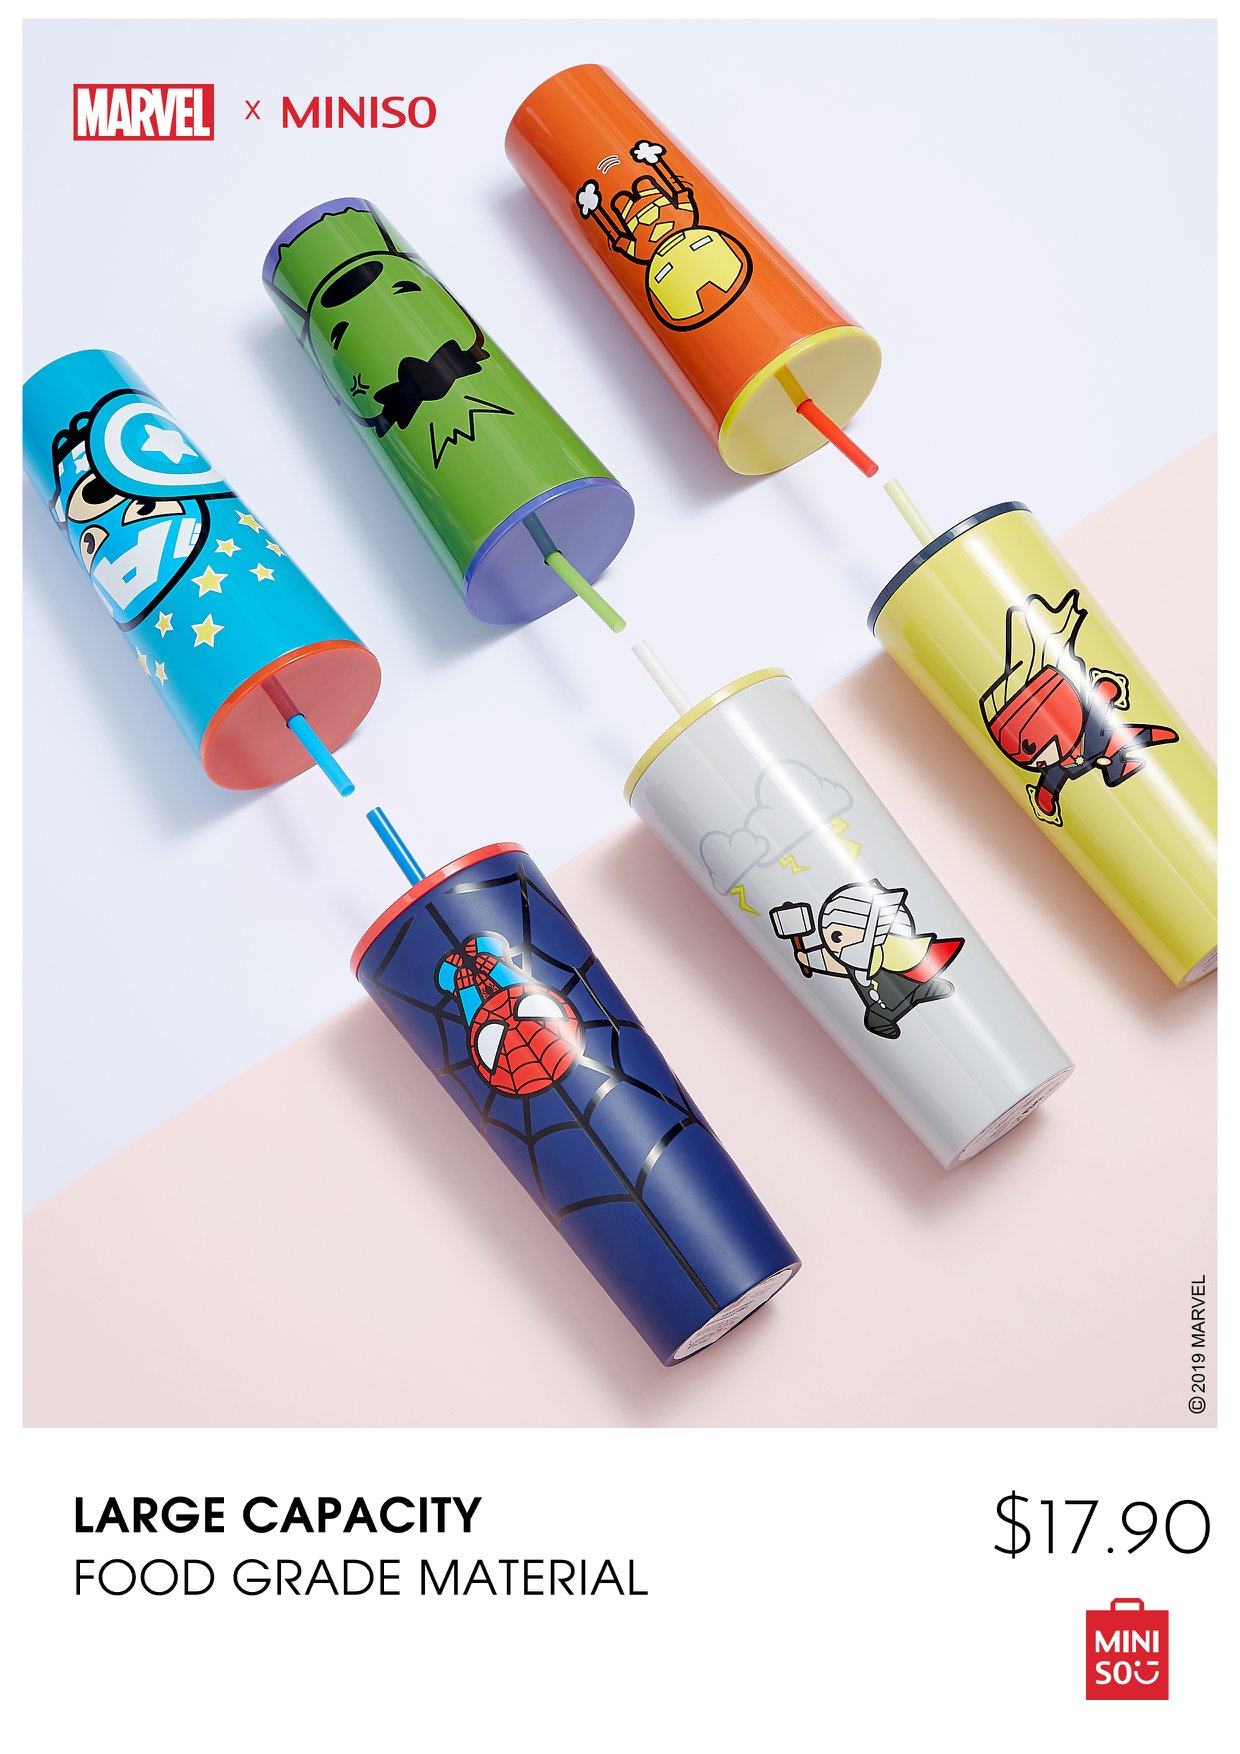 Miniso x Marvel merchandise to be launched in Singapore on 5 July 2019 - 3